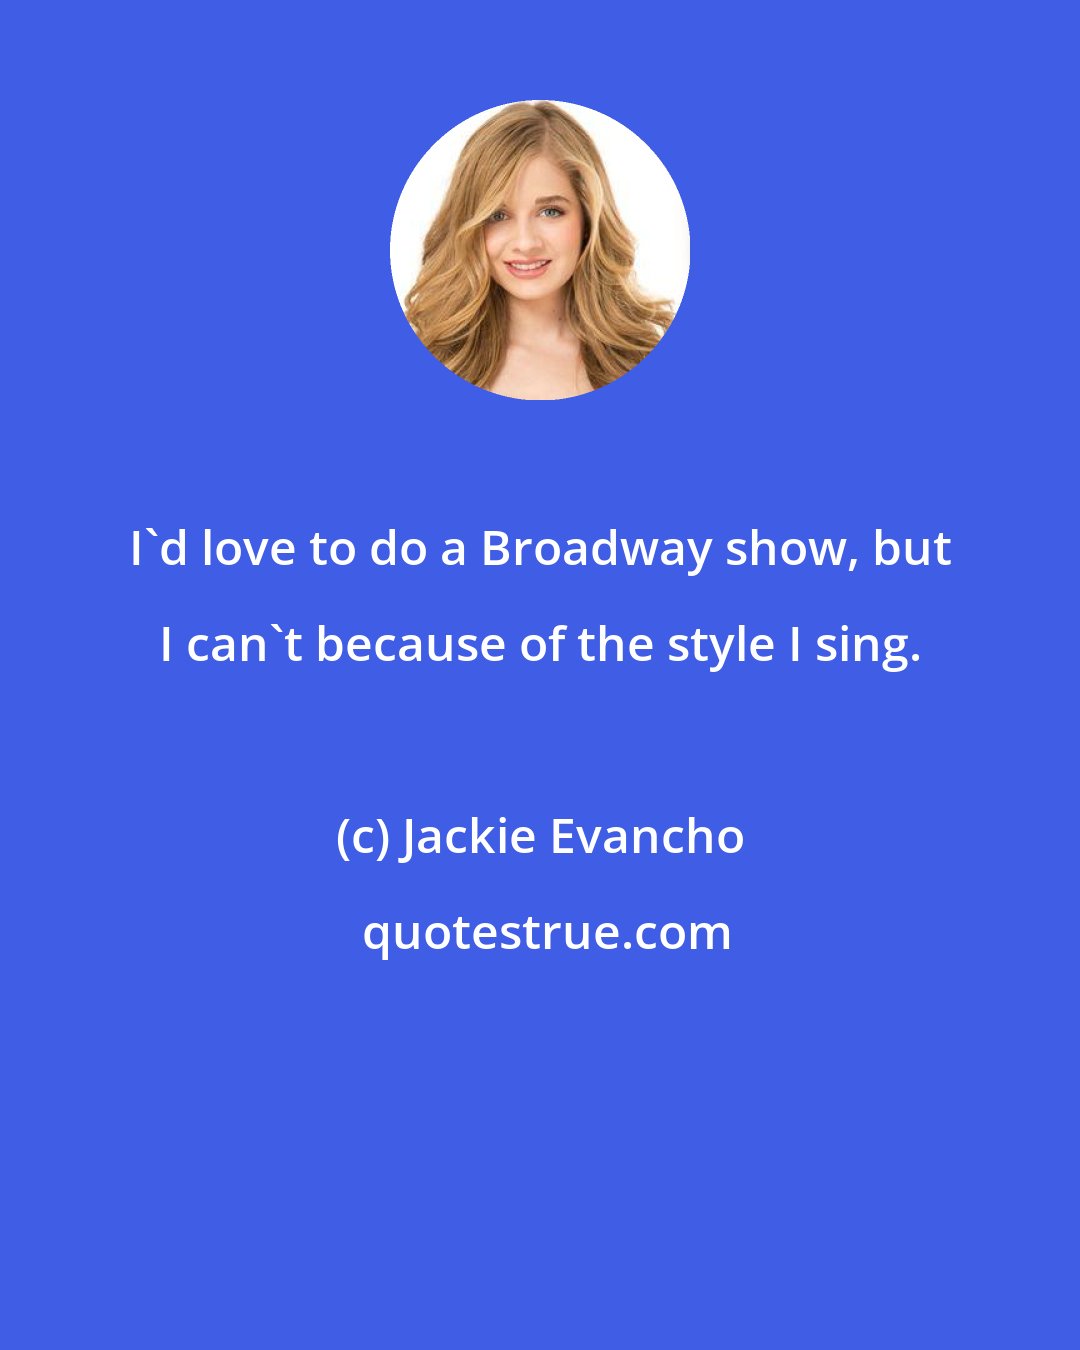 Jackie Evancho: I'd love to do a Broadway show, but I can't because of the style I sing.